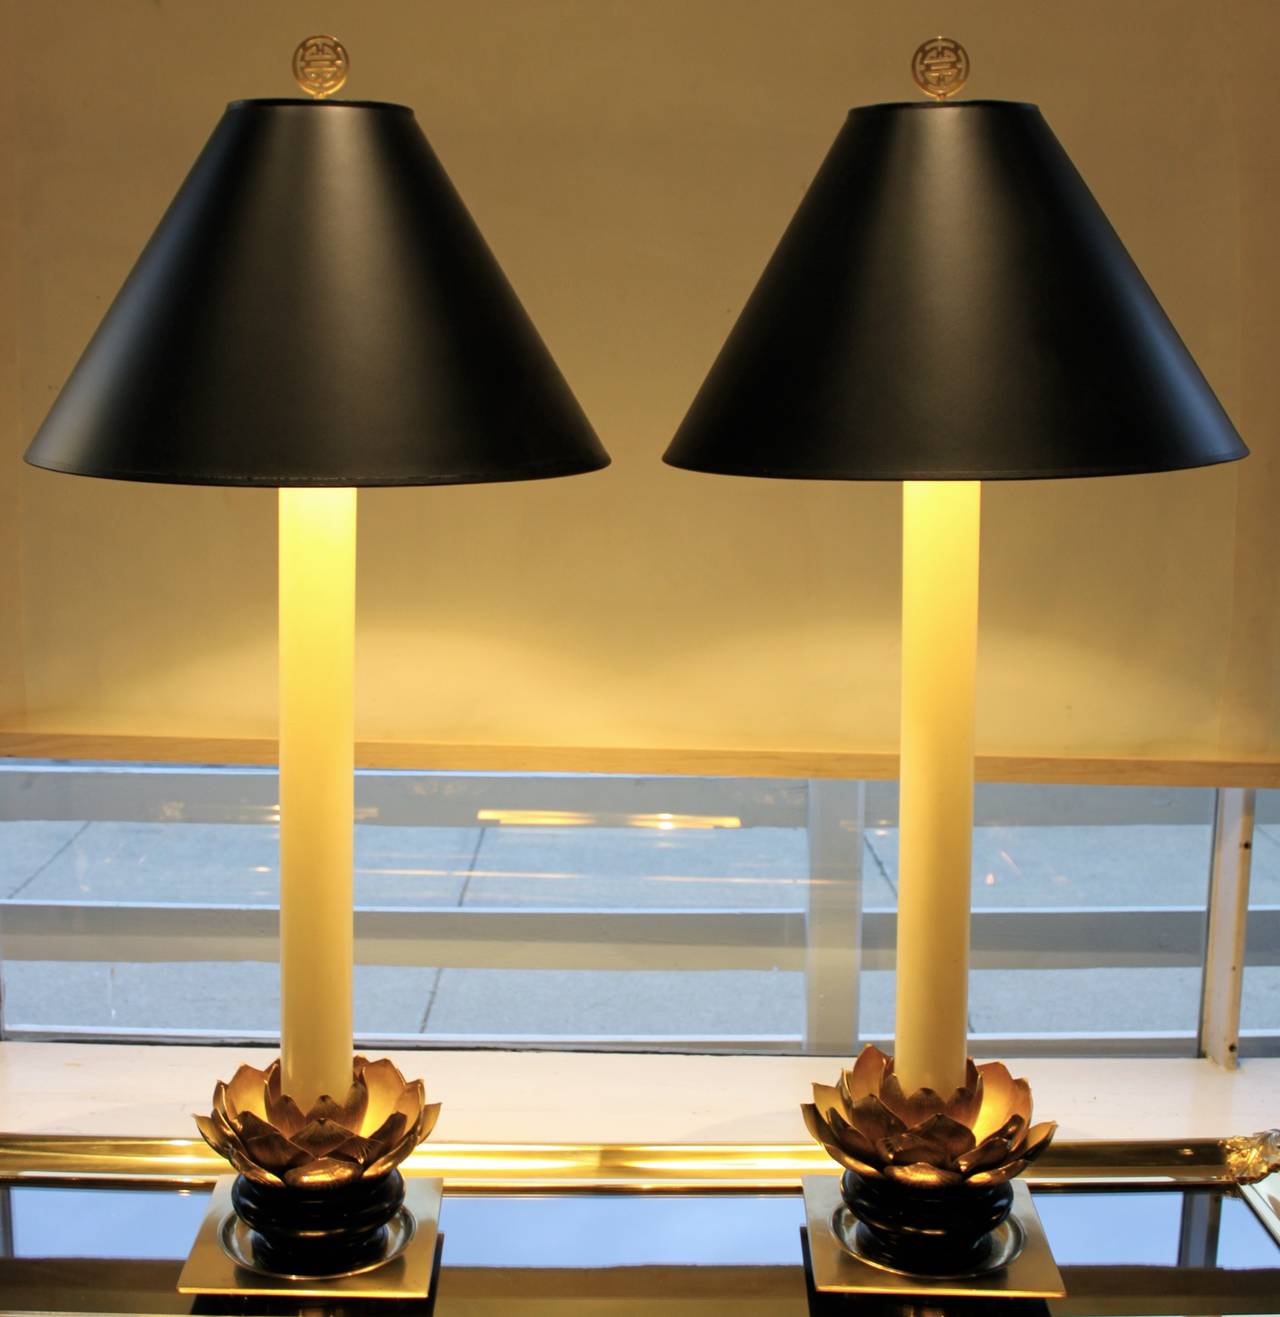 Pair of Mid-Century Modern Asian inspired table lamps by Stiffel. Excellent vintage condition.